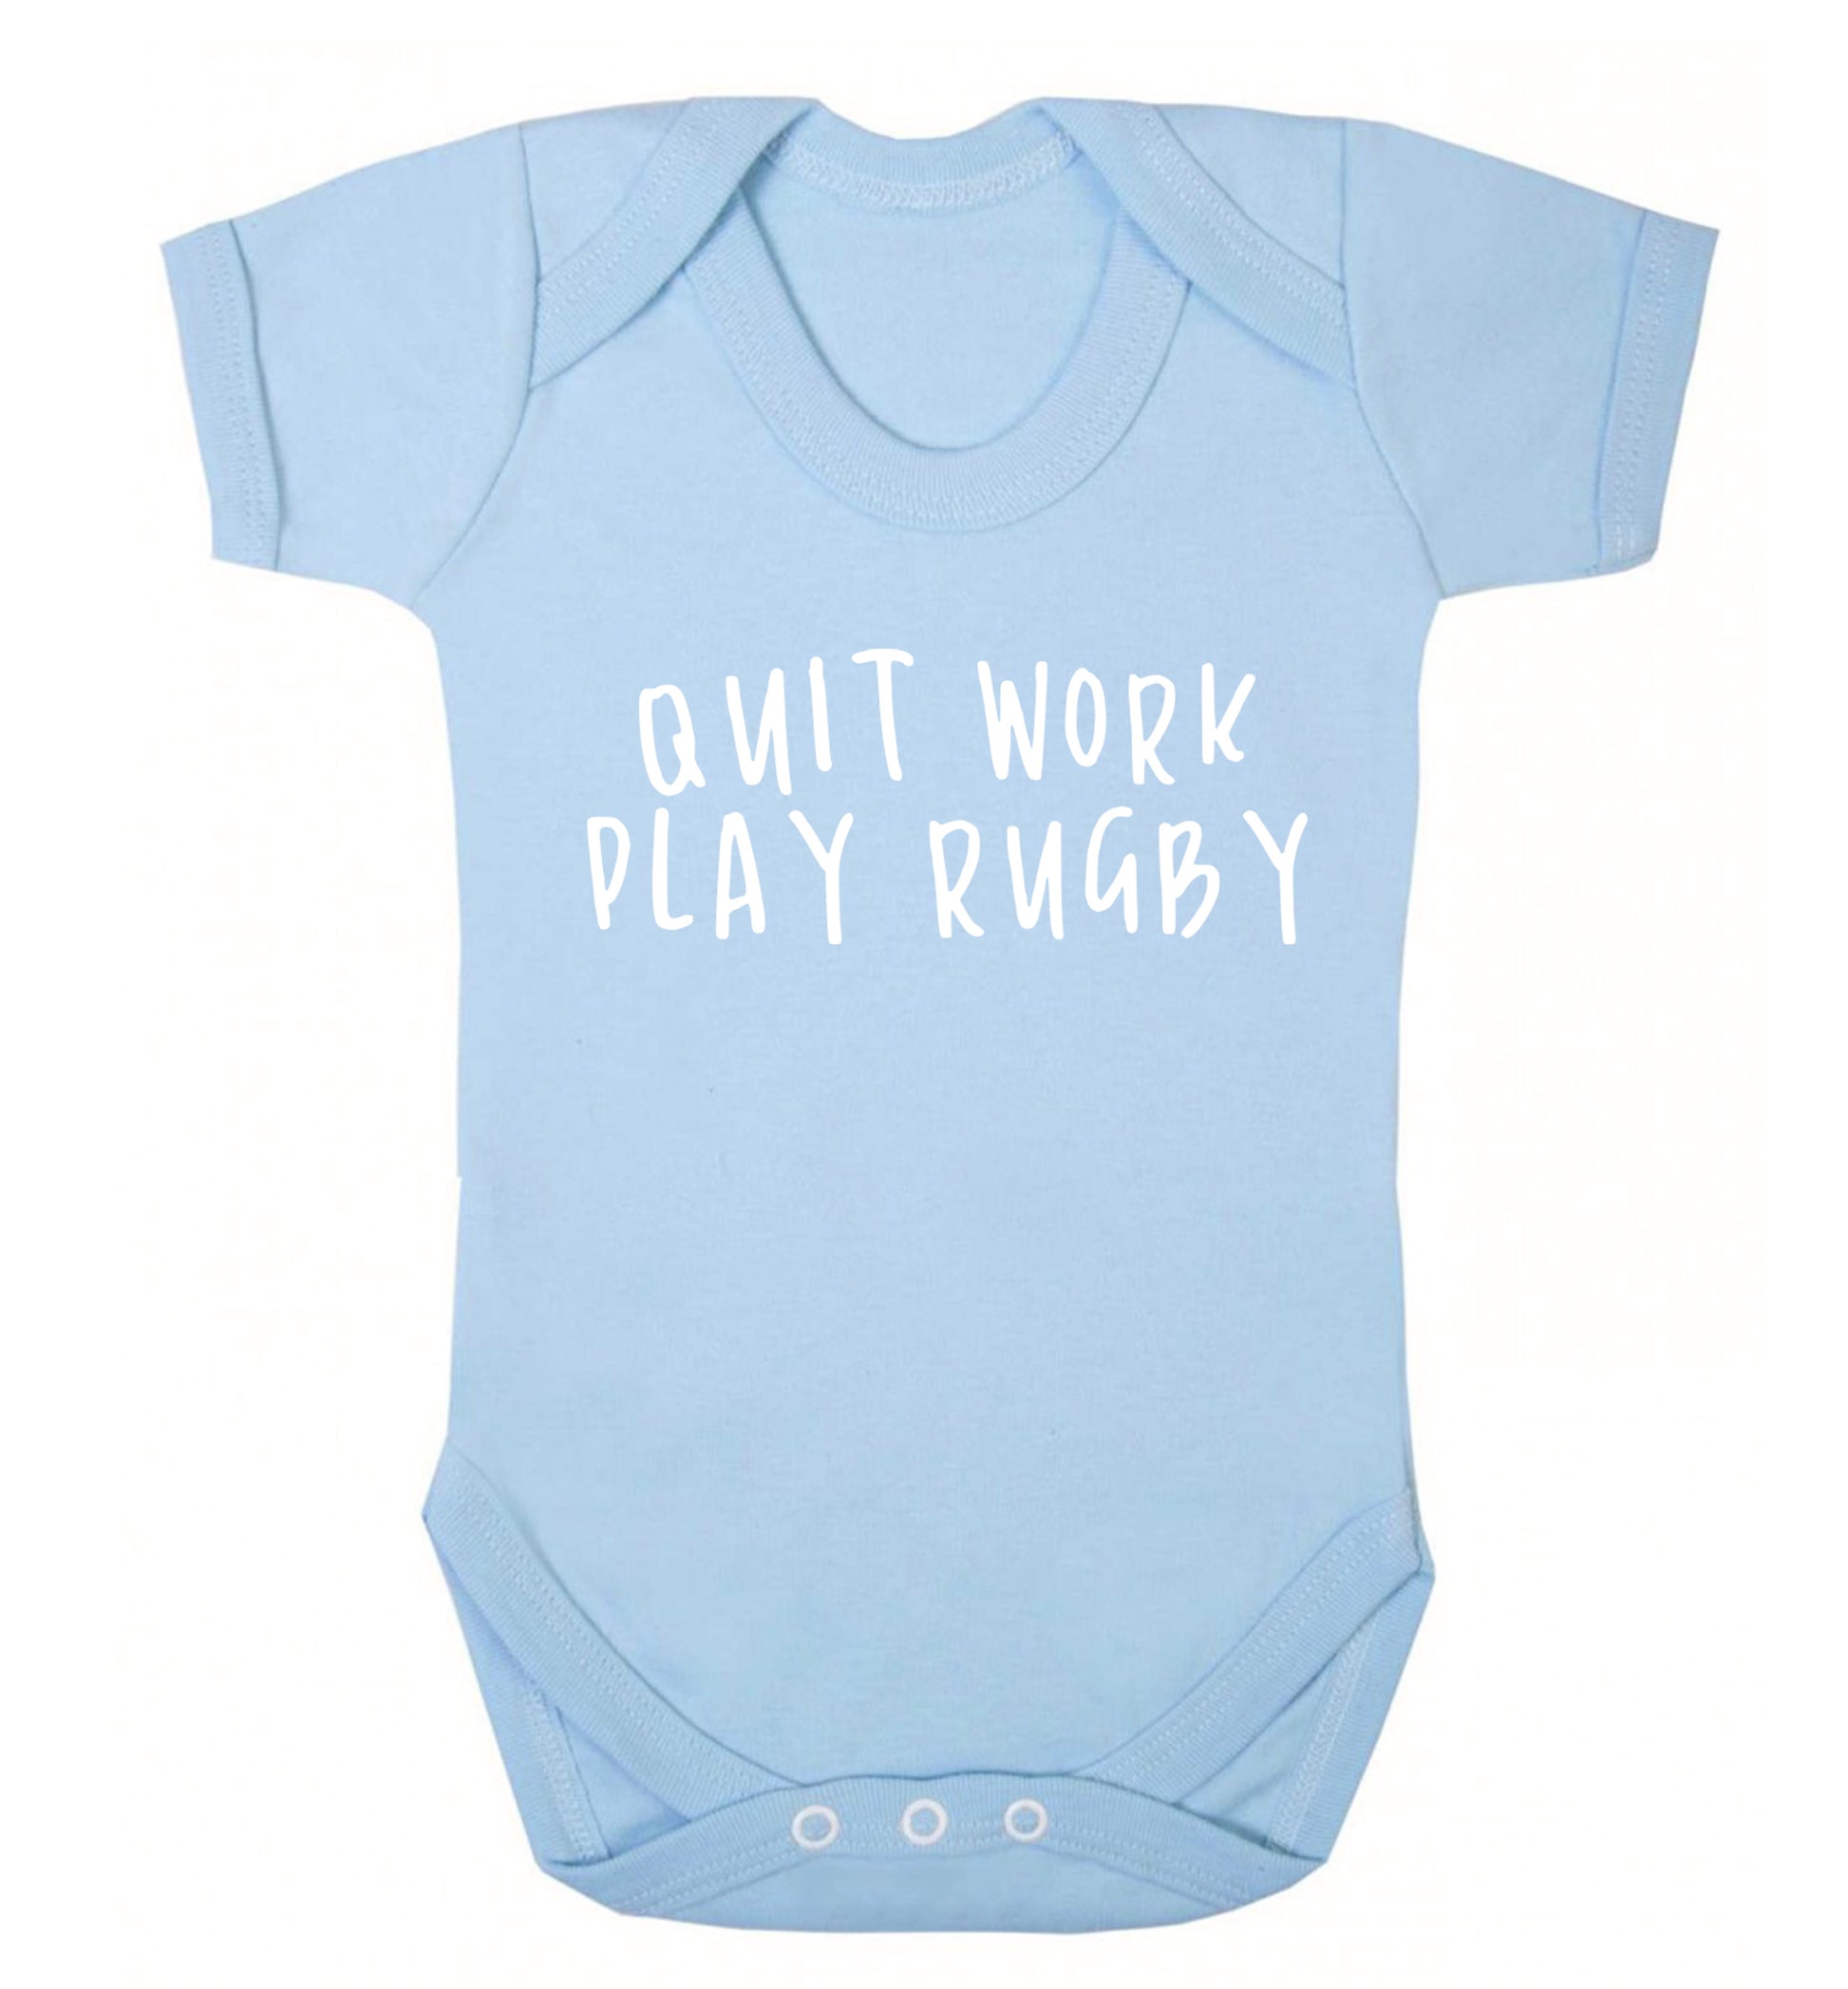 Quit work play rugby Baby Vest pale blue 18-24 months